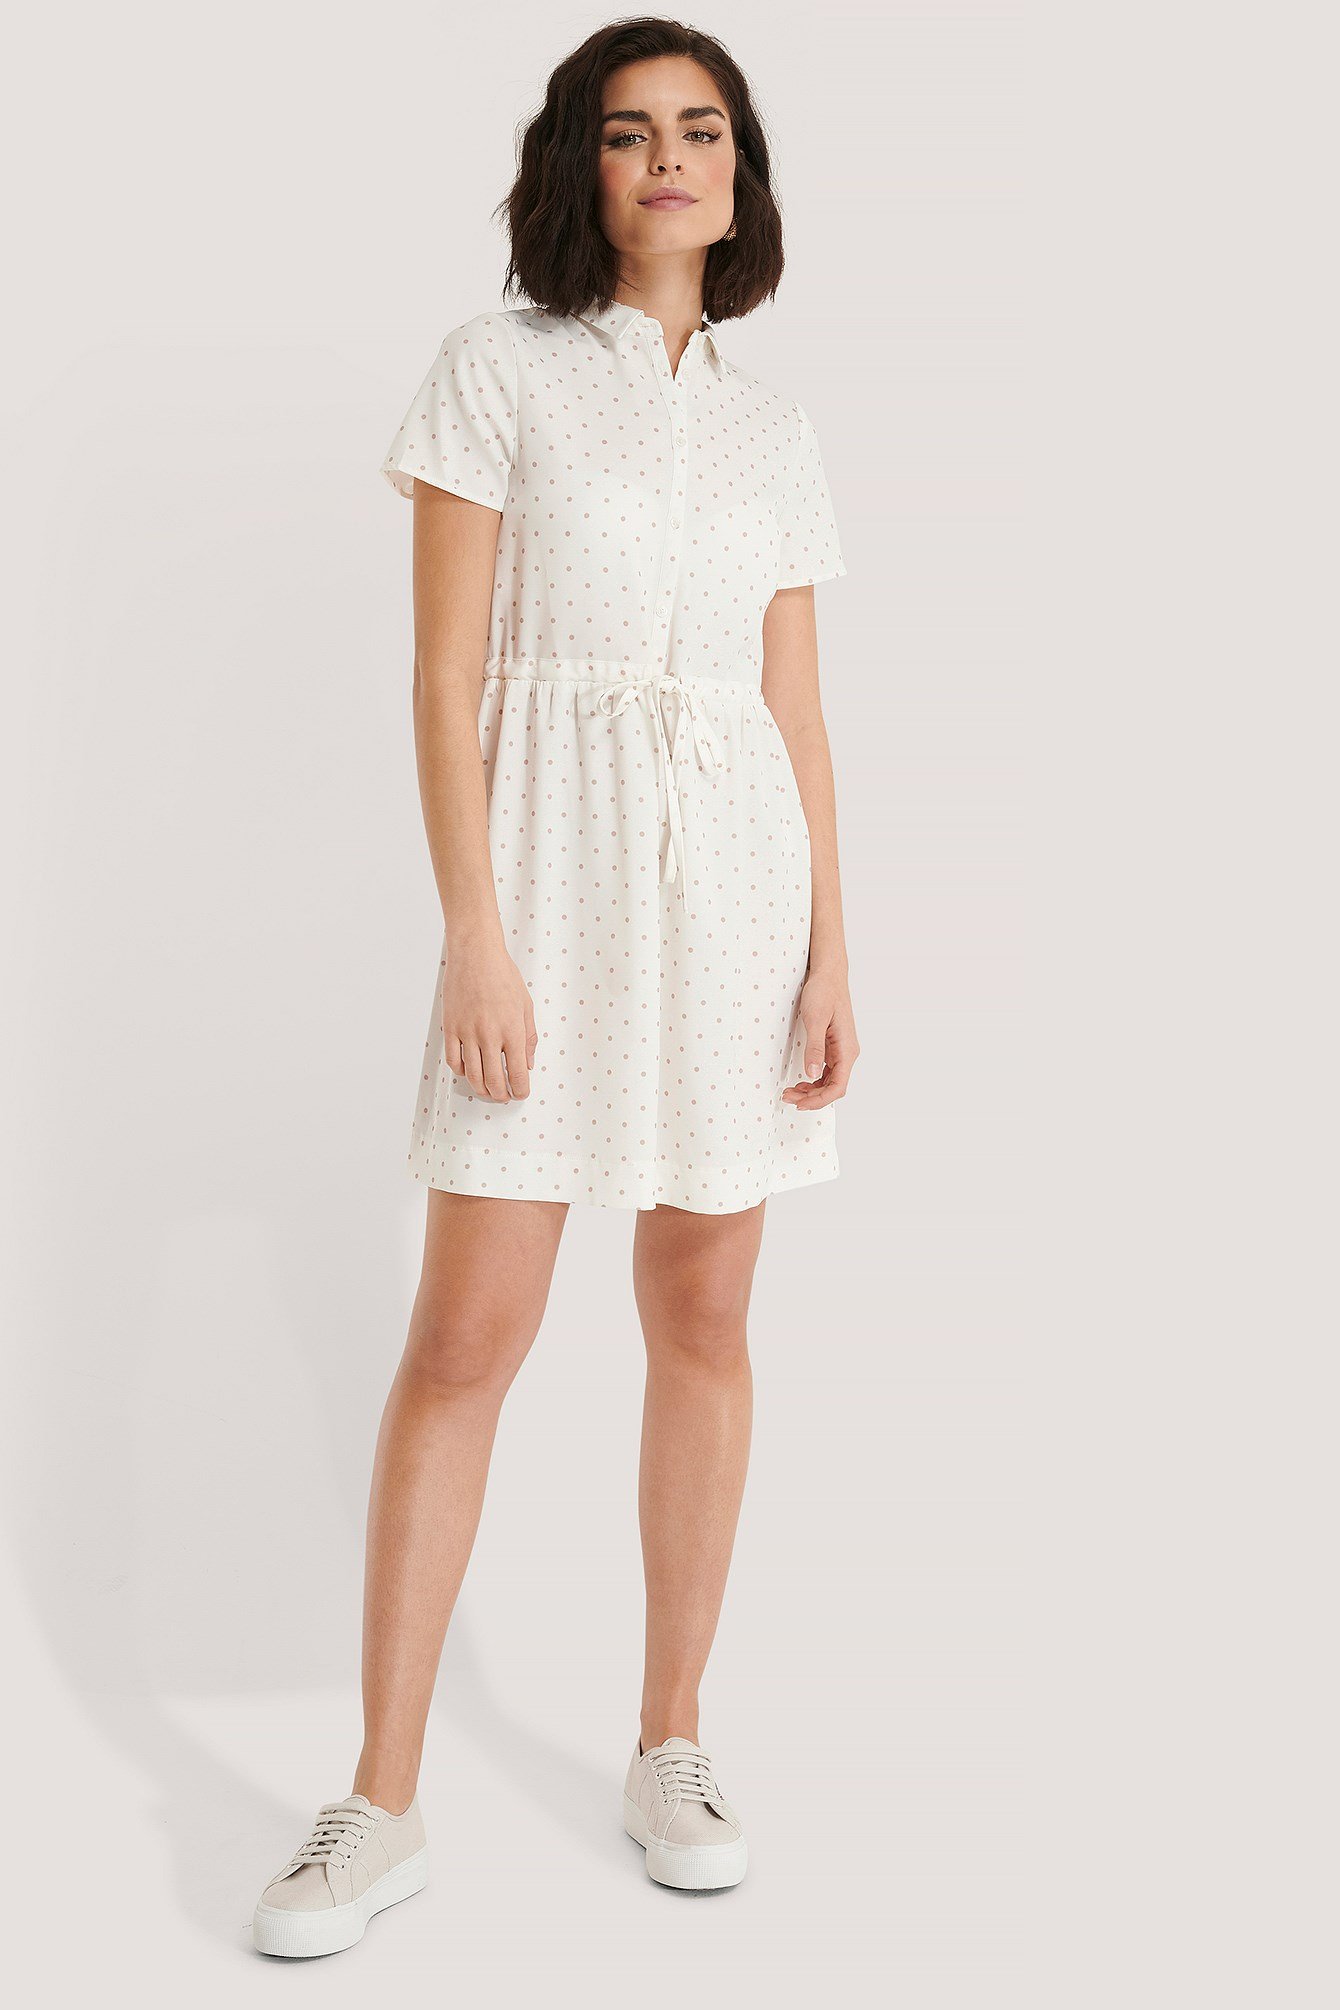 Black/White dots Dotted Collar Dress